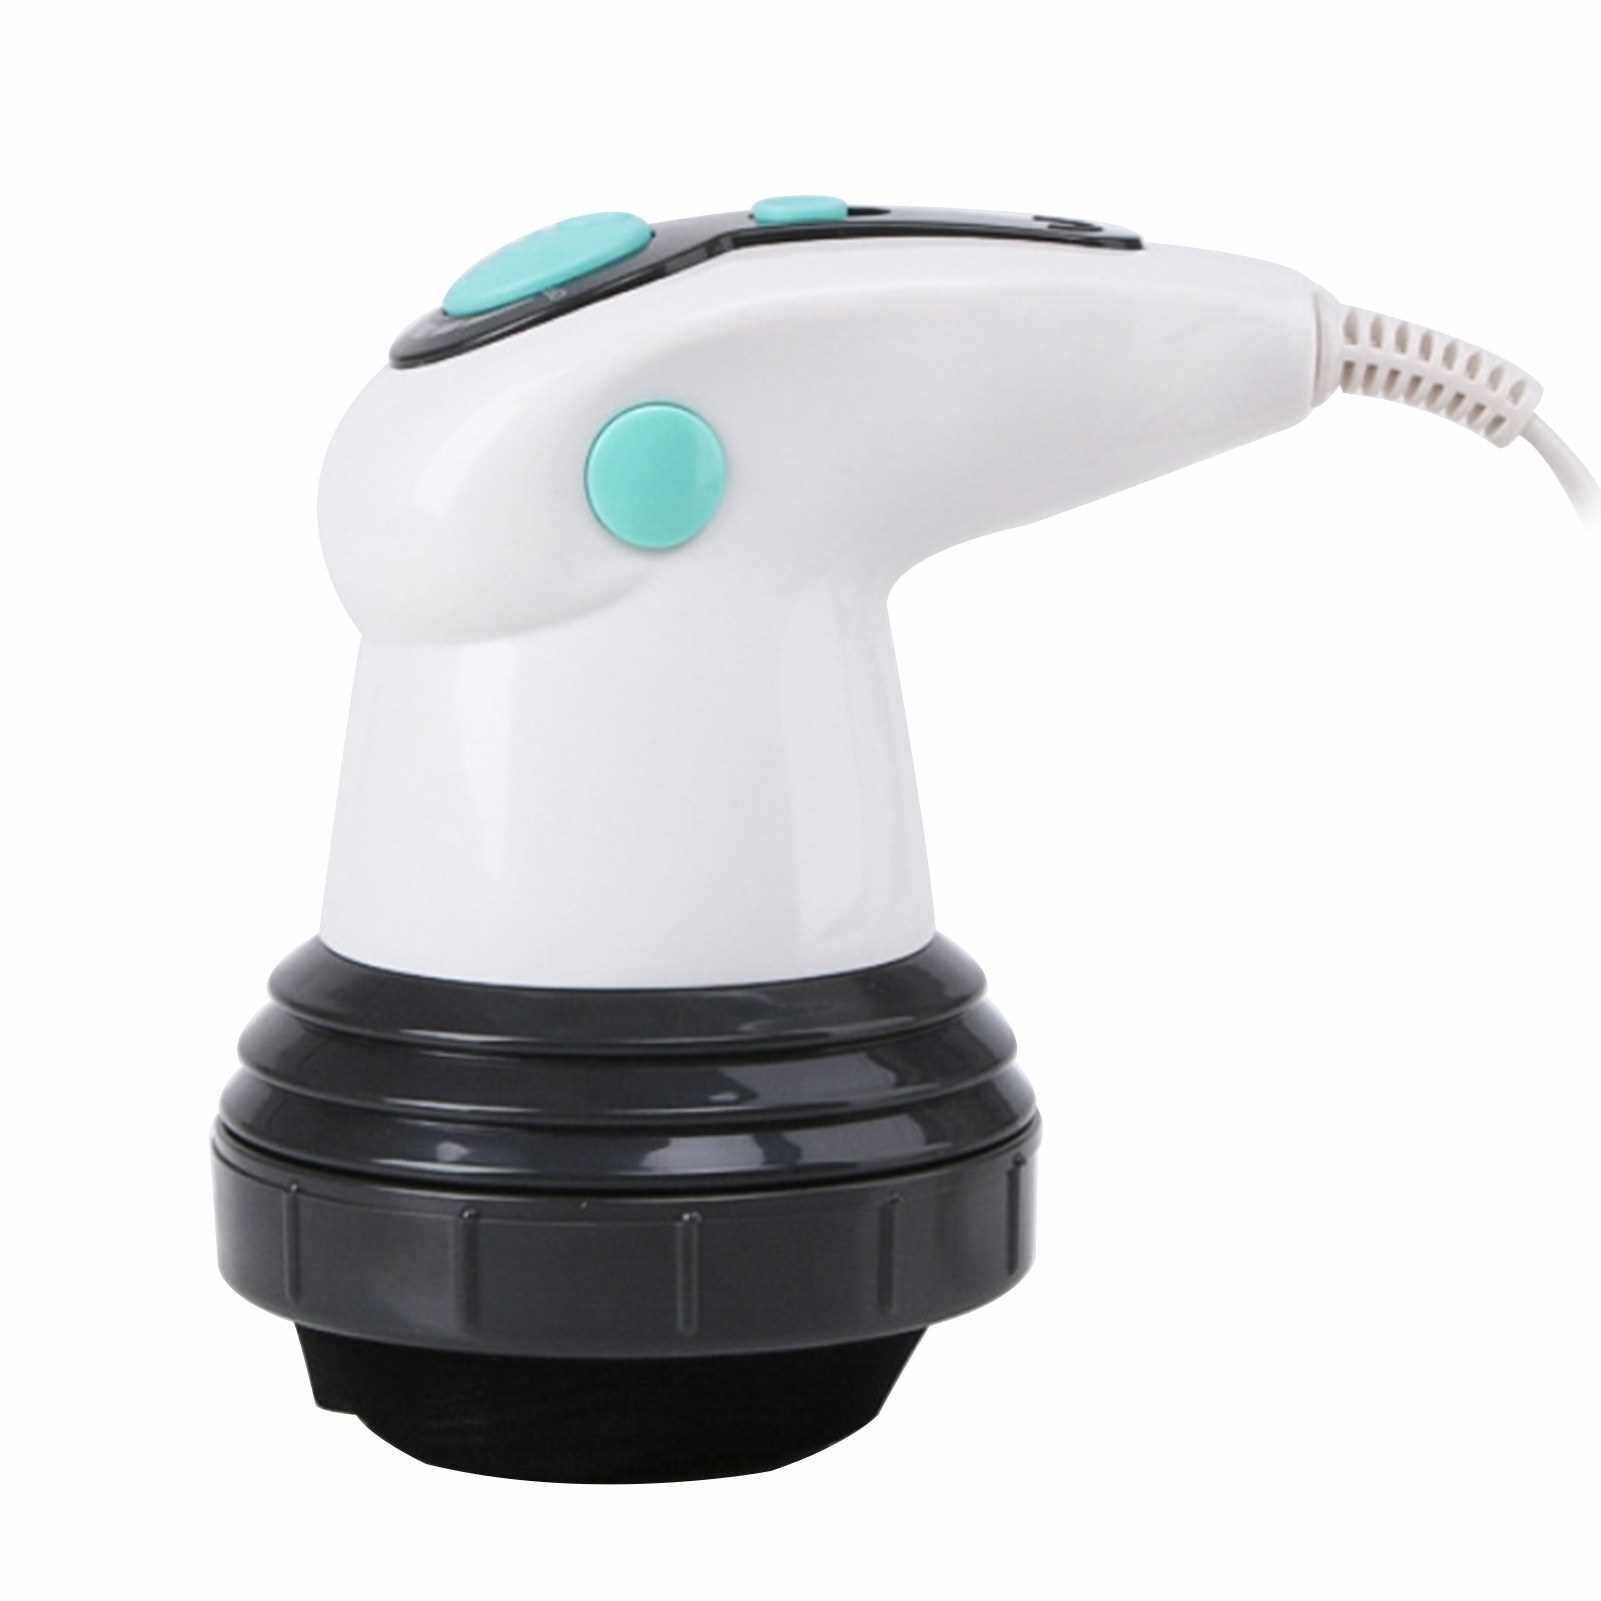 Electric Massager 4 in 1 Infrared Vibration Massage Four Interchangeable Heads Remove Fat Toxin for Women (Standard)